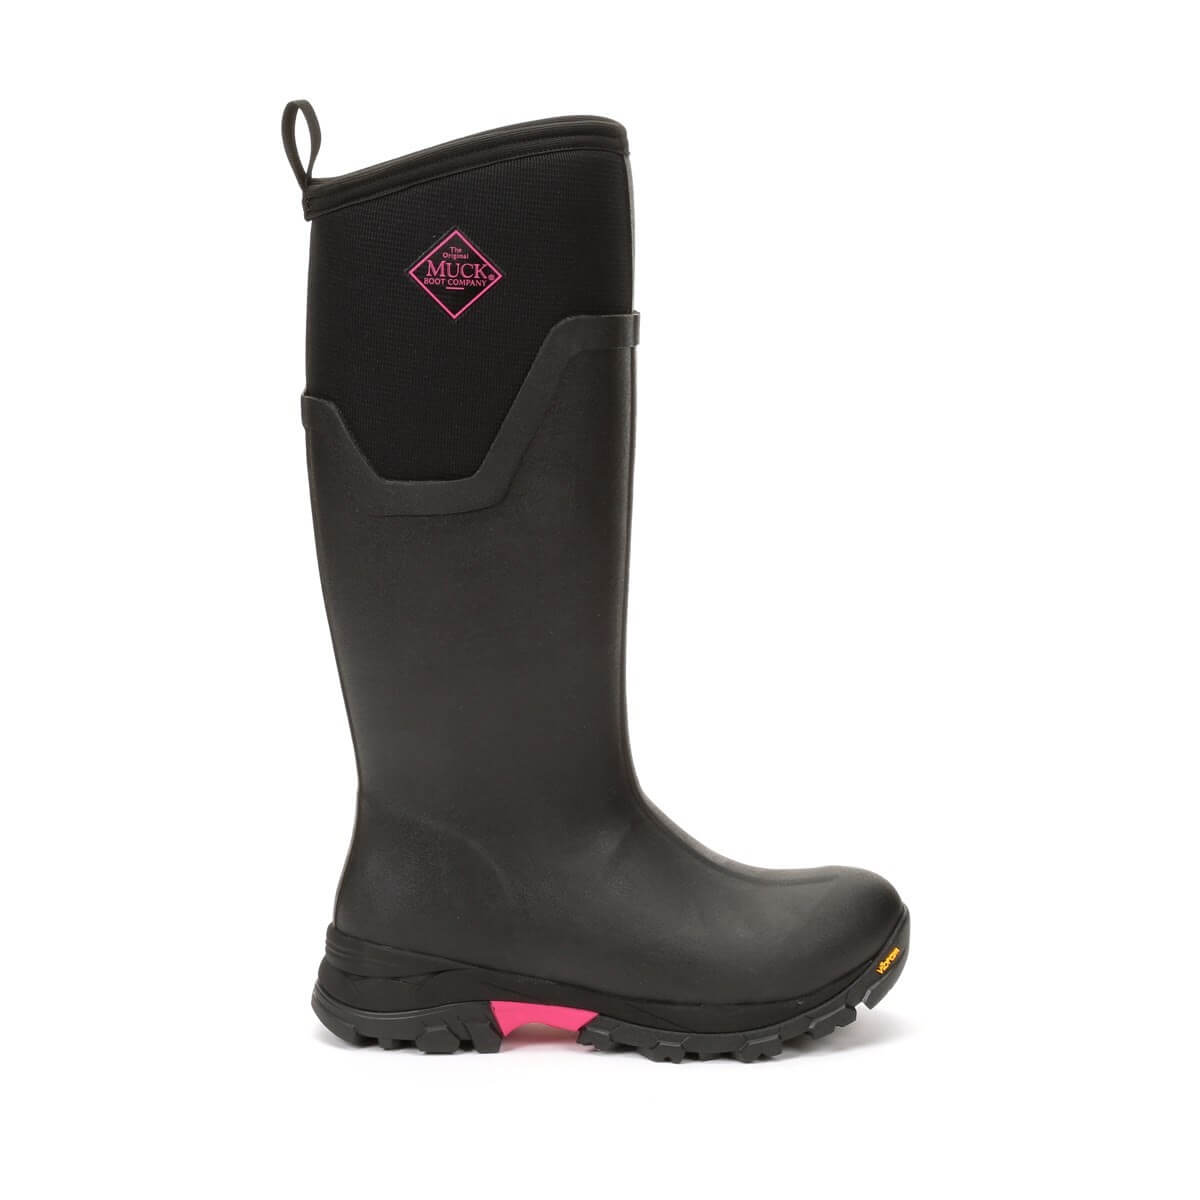 Muck Boots Arctic Ice Tall Wellington Boots Black/Hot Pink 8#colour_black-hot-pink